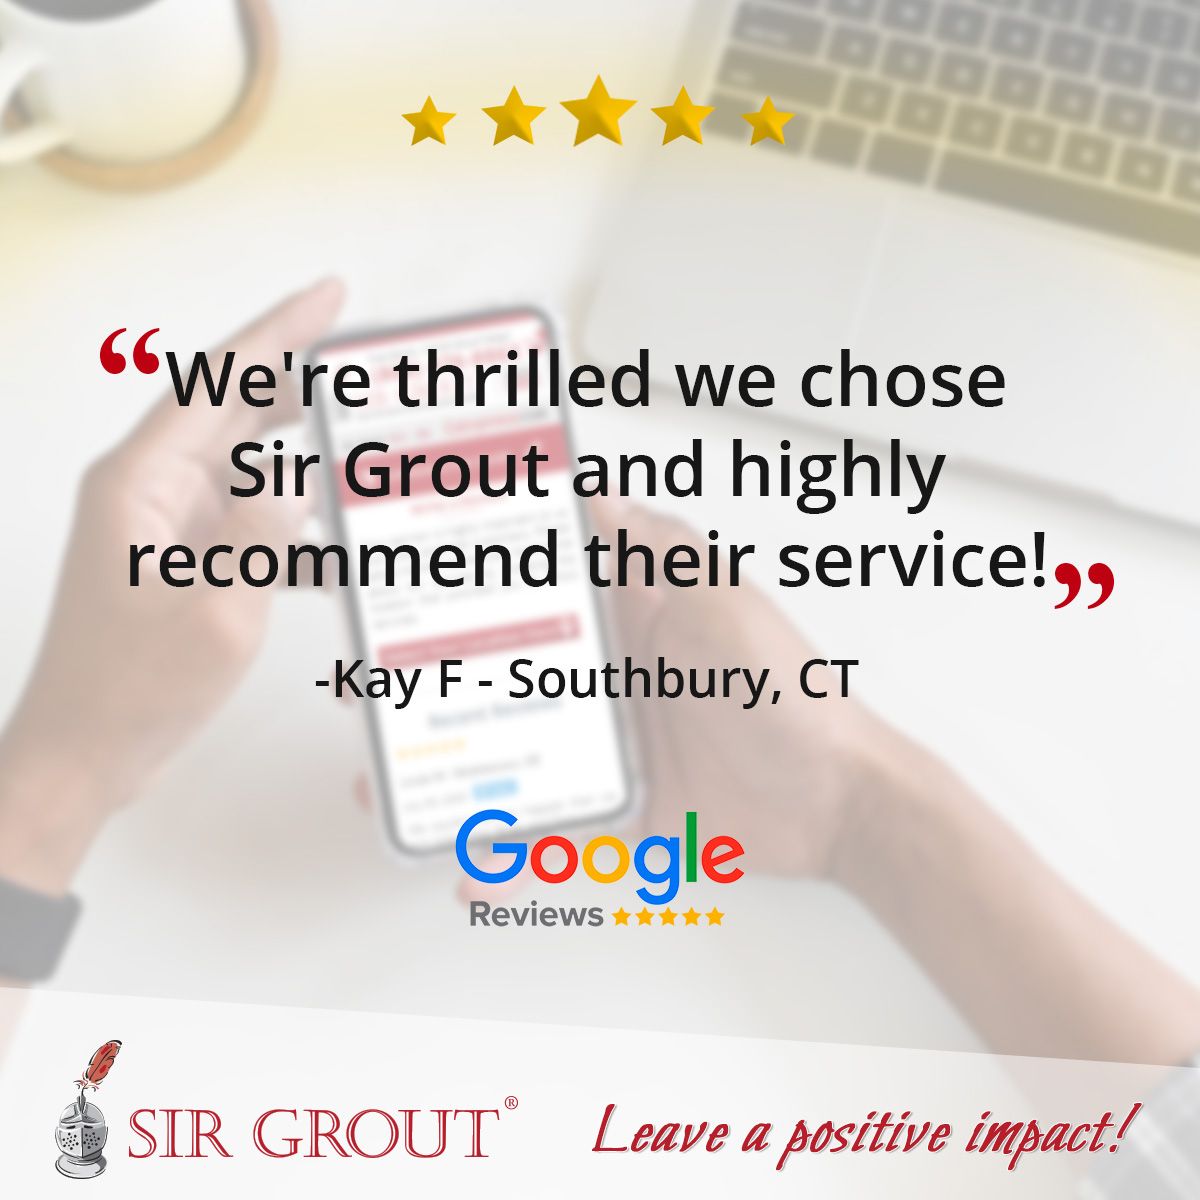 We're thrilled we chose Sir Grout and highly recommend their service!